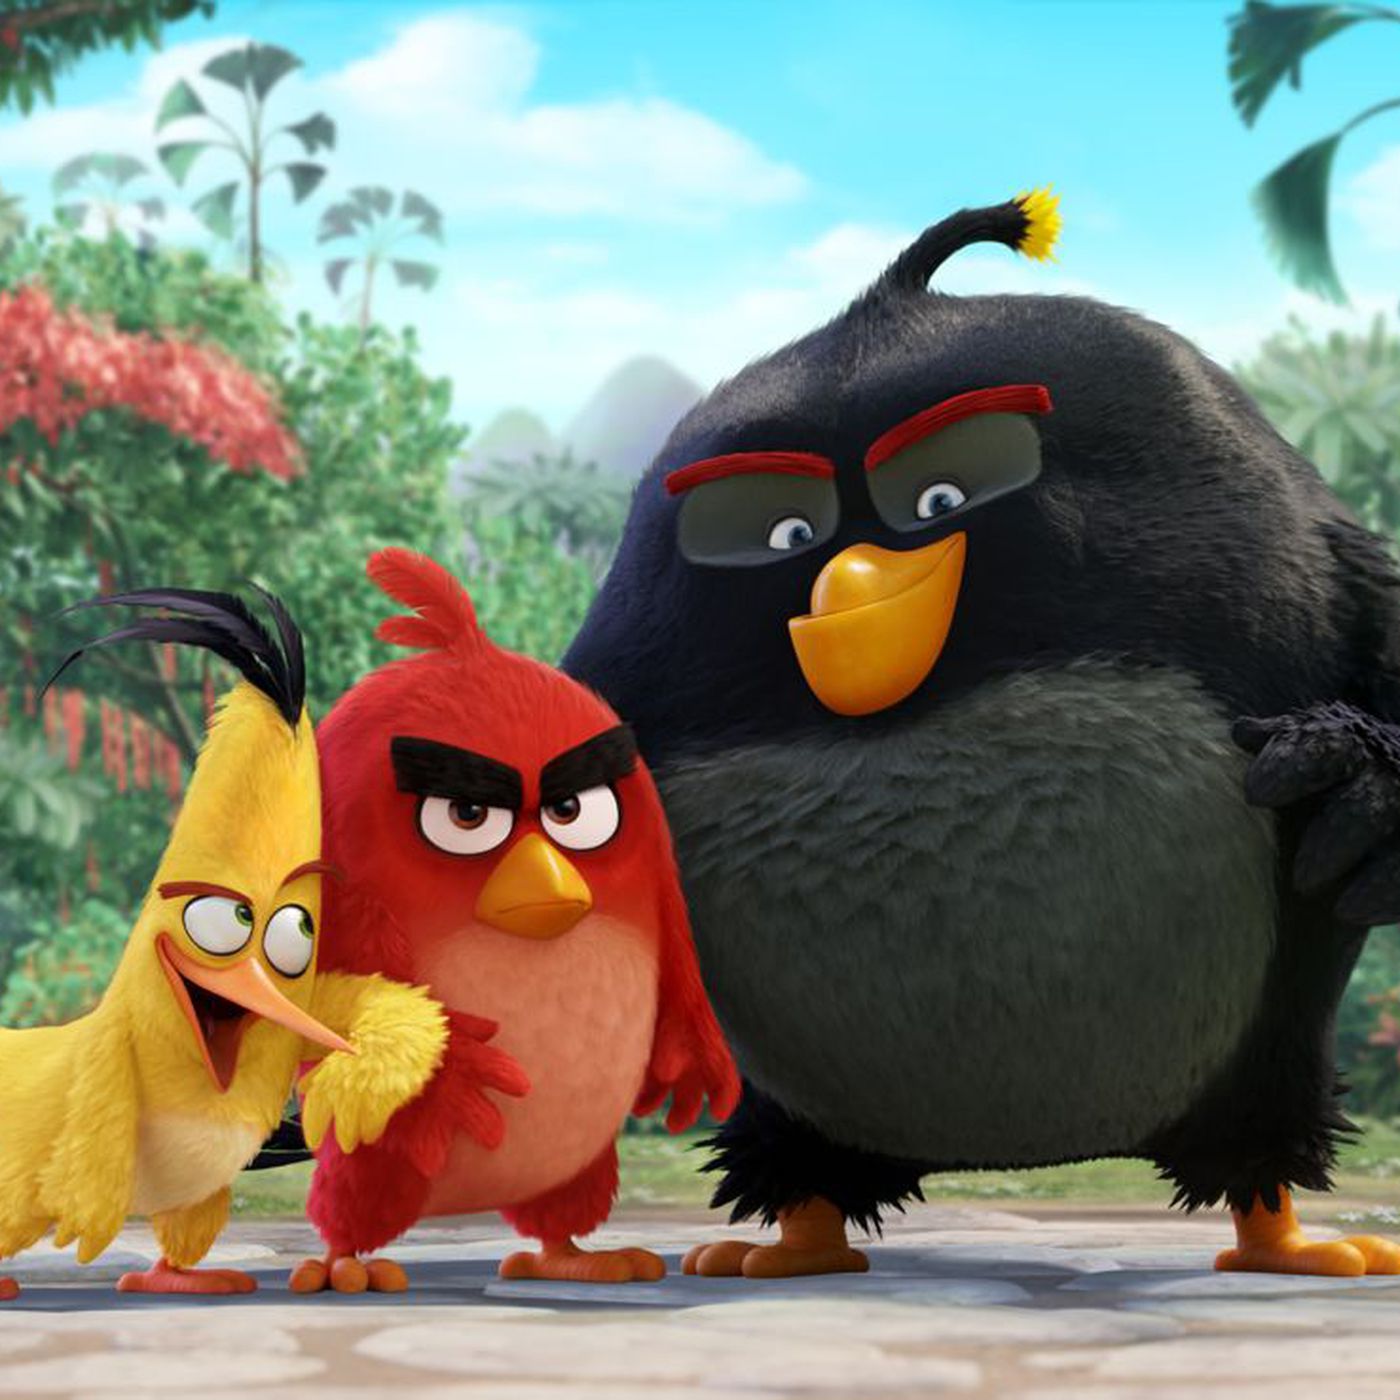 Video Game to Movie Adaptations - THE ANGRY BIRDS MOVIE / THE ANGRY BIRDS MOVIE